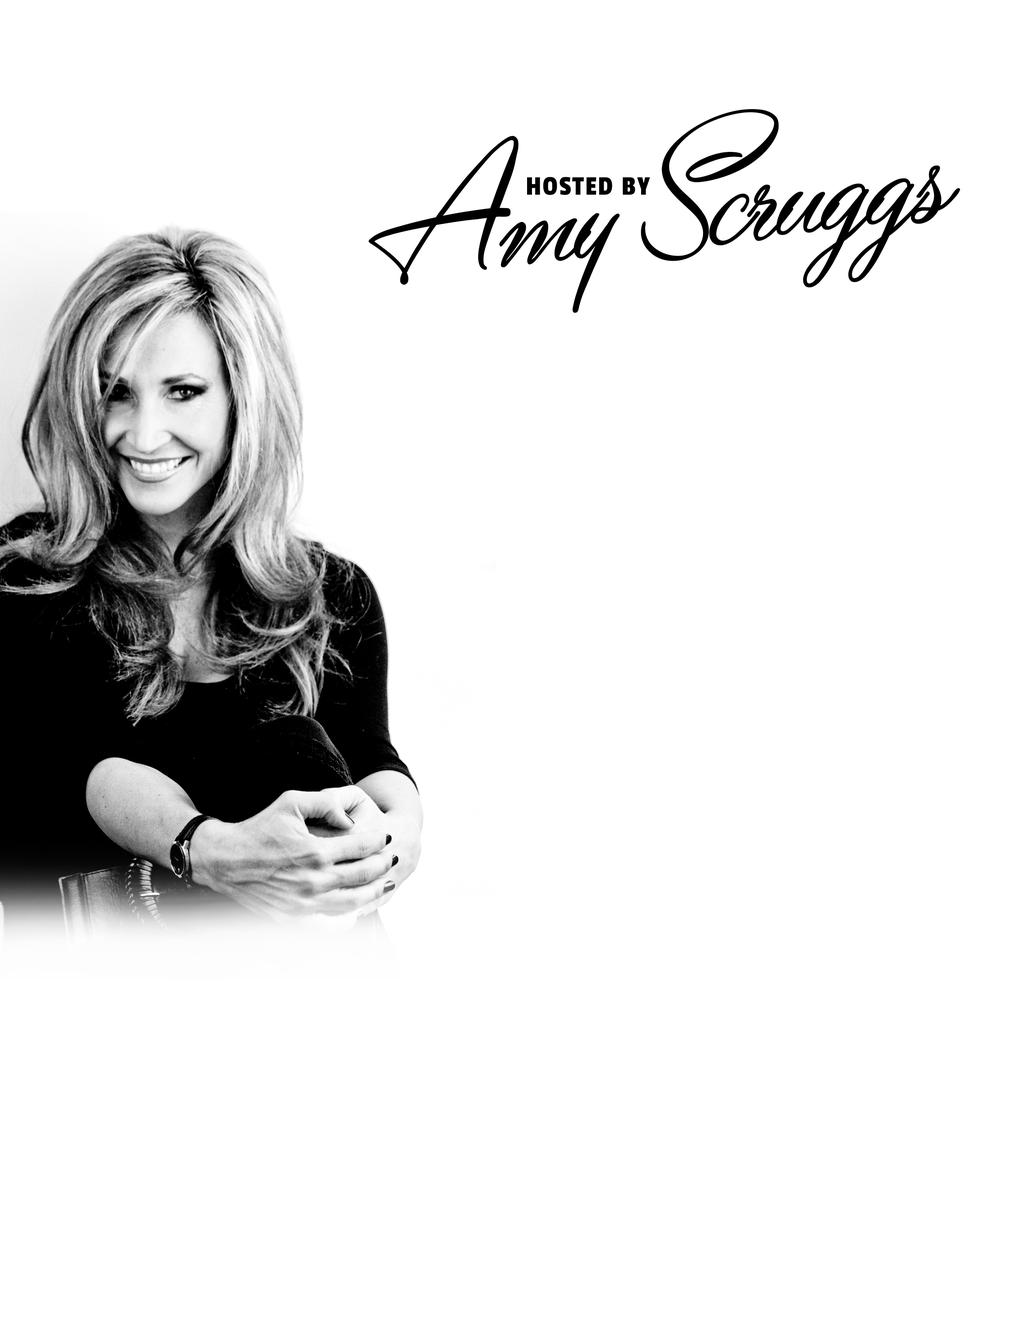 Amy Scruggs is a nationally known recording artist who has opened for many country music greats.